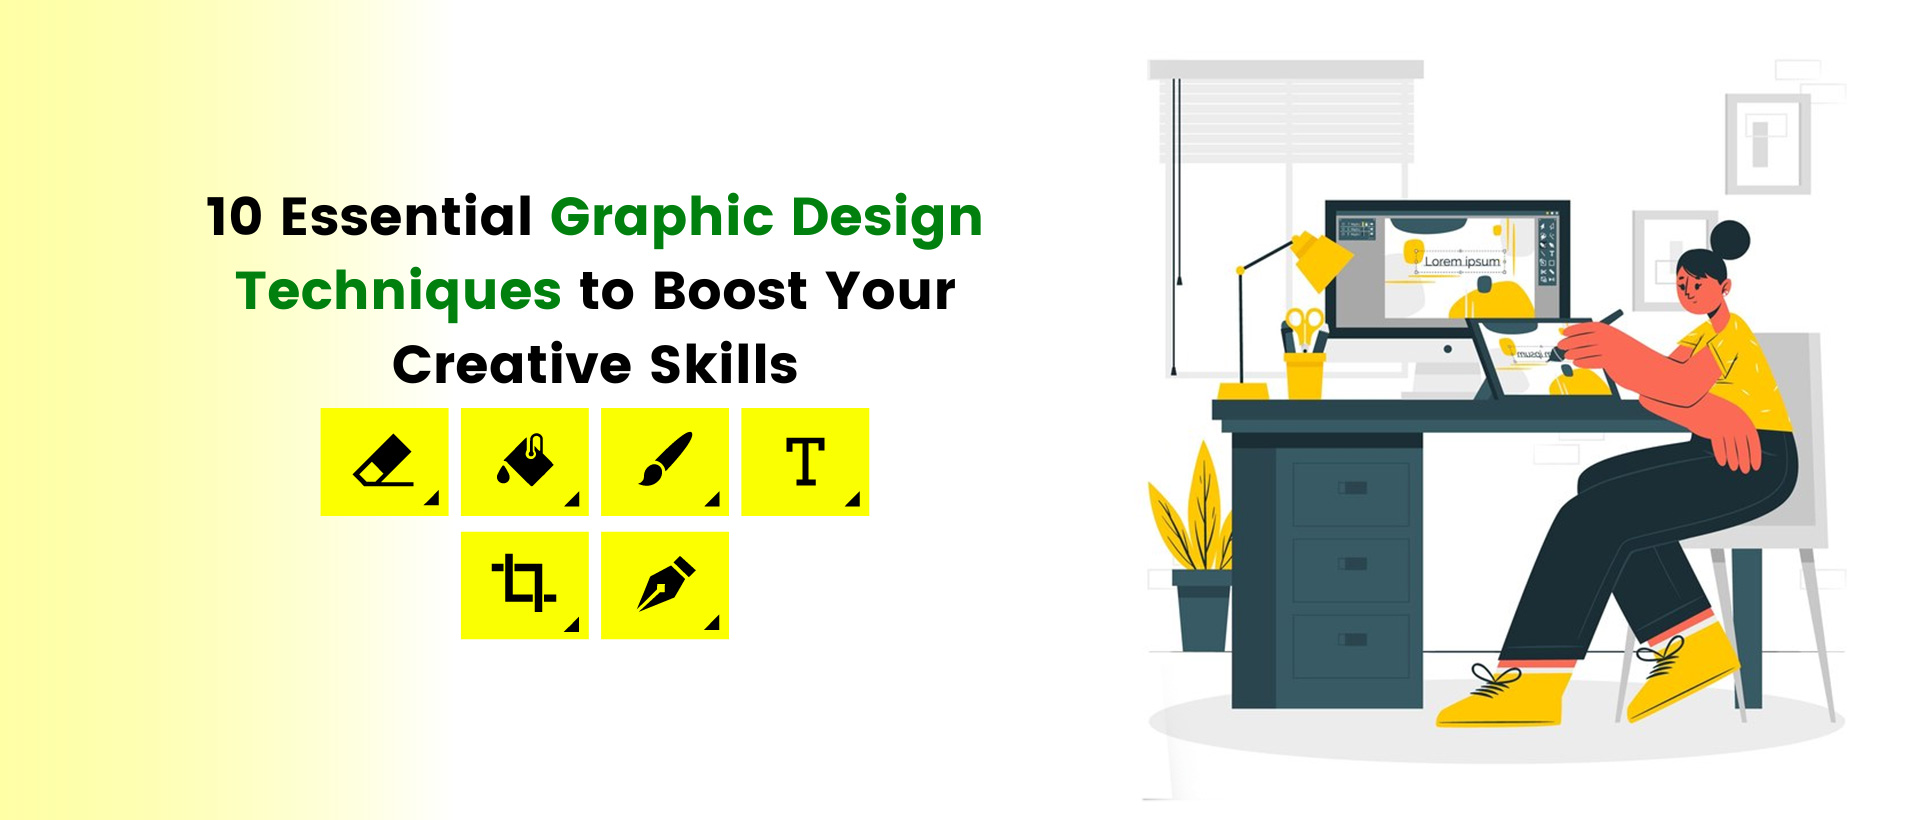 10 Essential Graphic Design Techniques to Boost Your Creative Skills